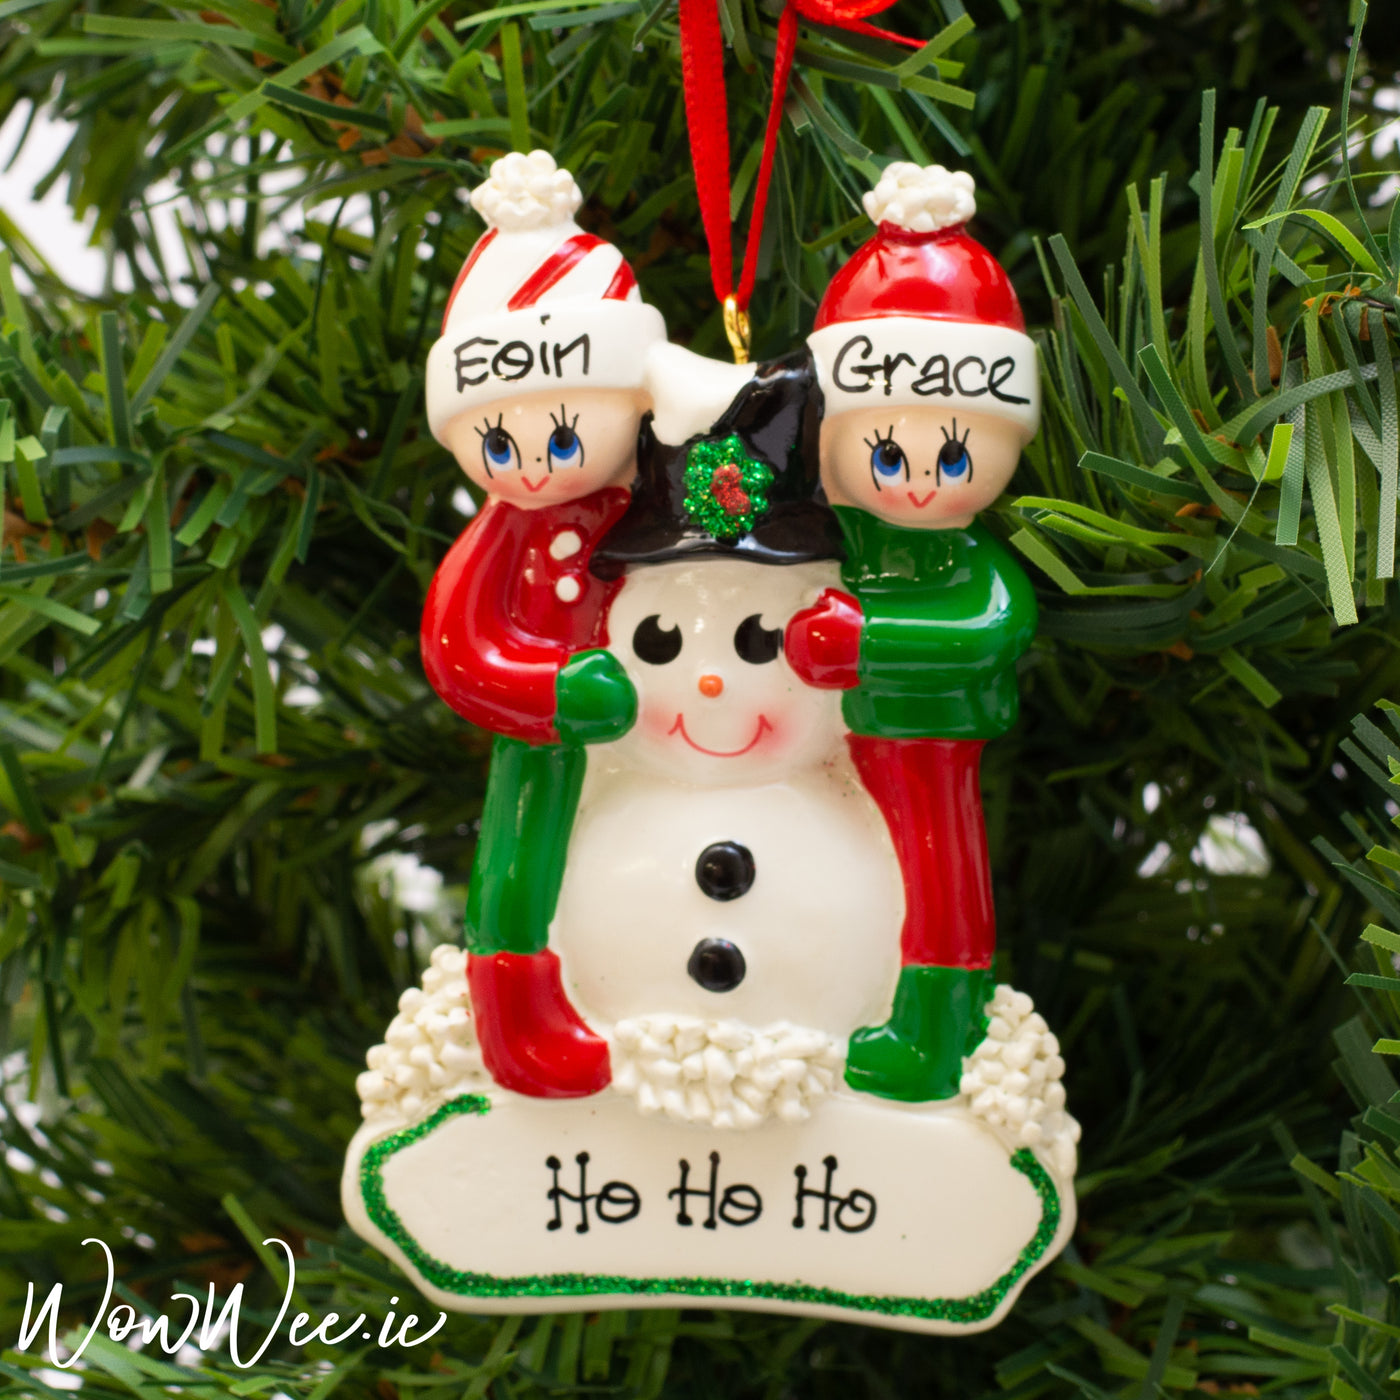 Personalised Christmas Ornament - Making a Snowman 2 - WowWee.ie Personalised Gifts